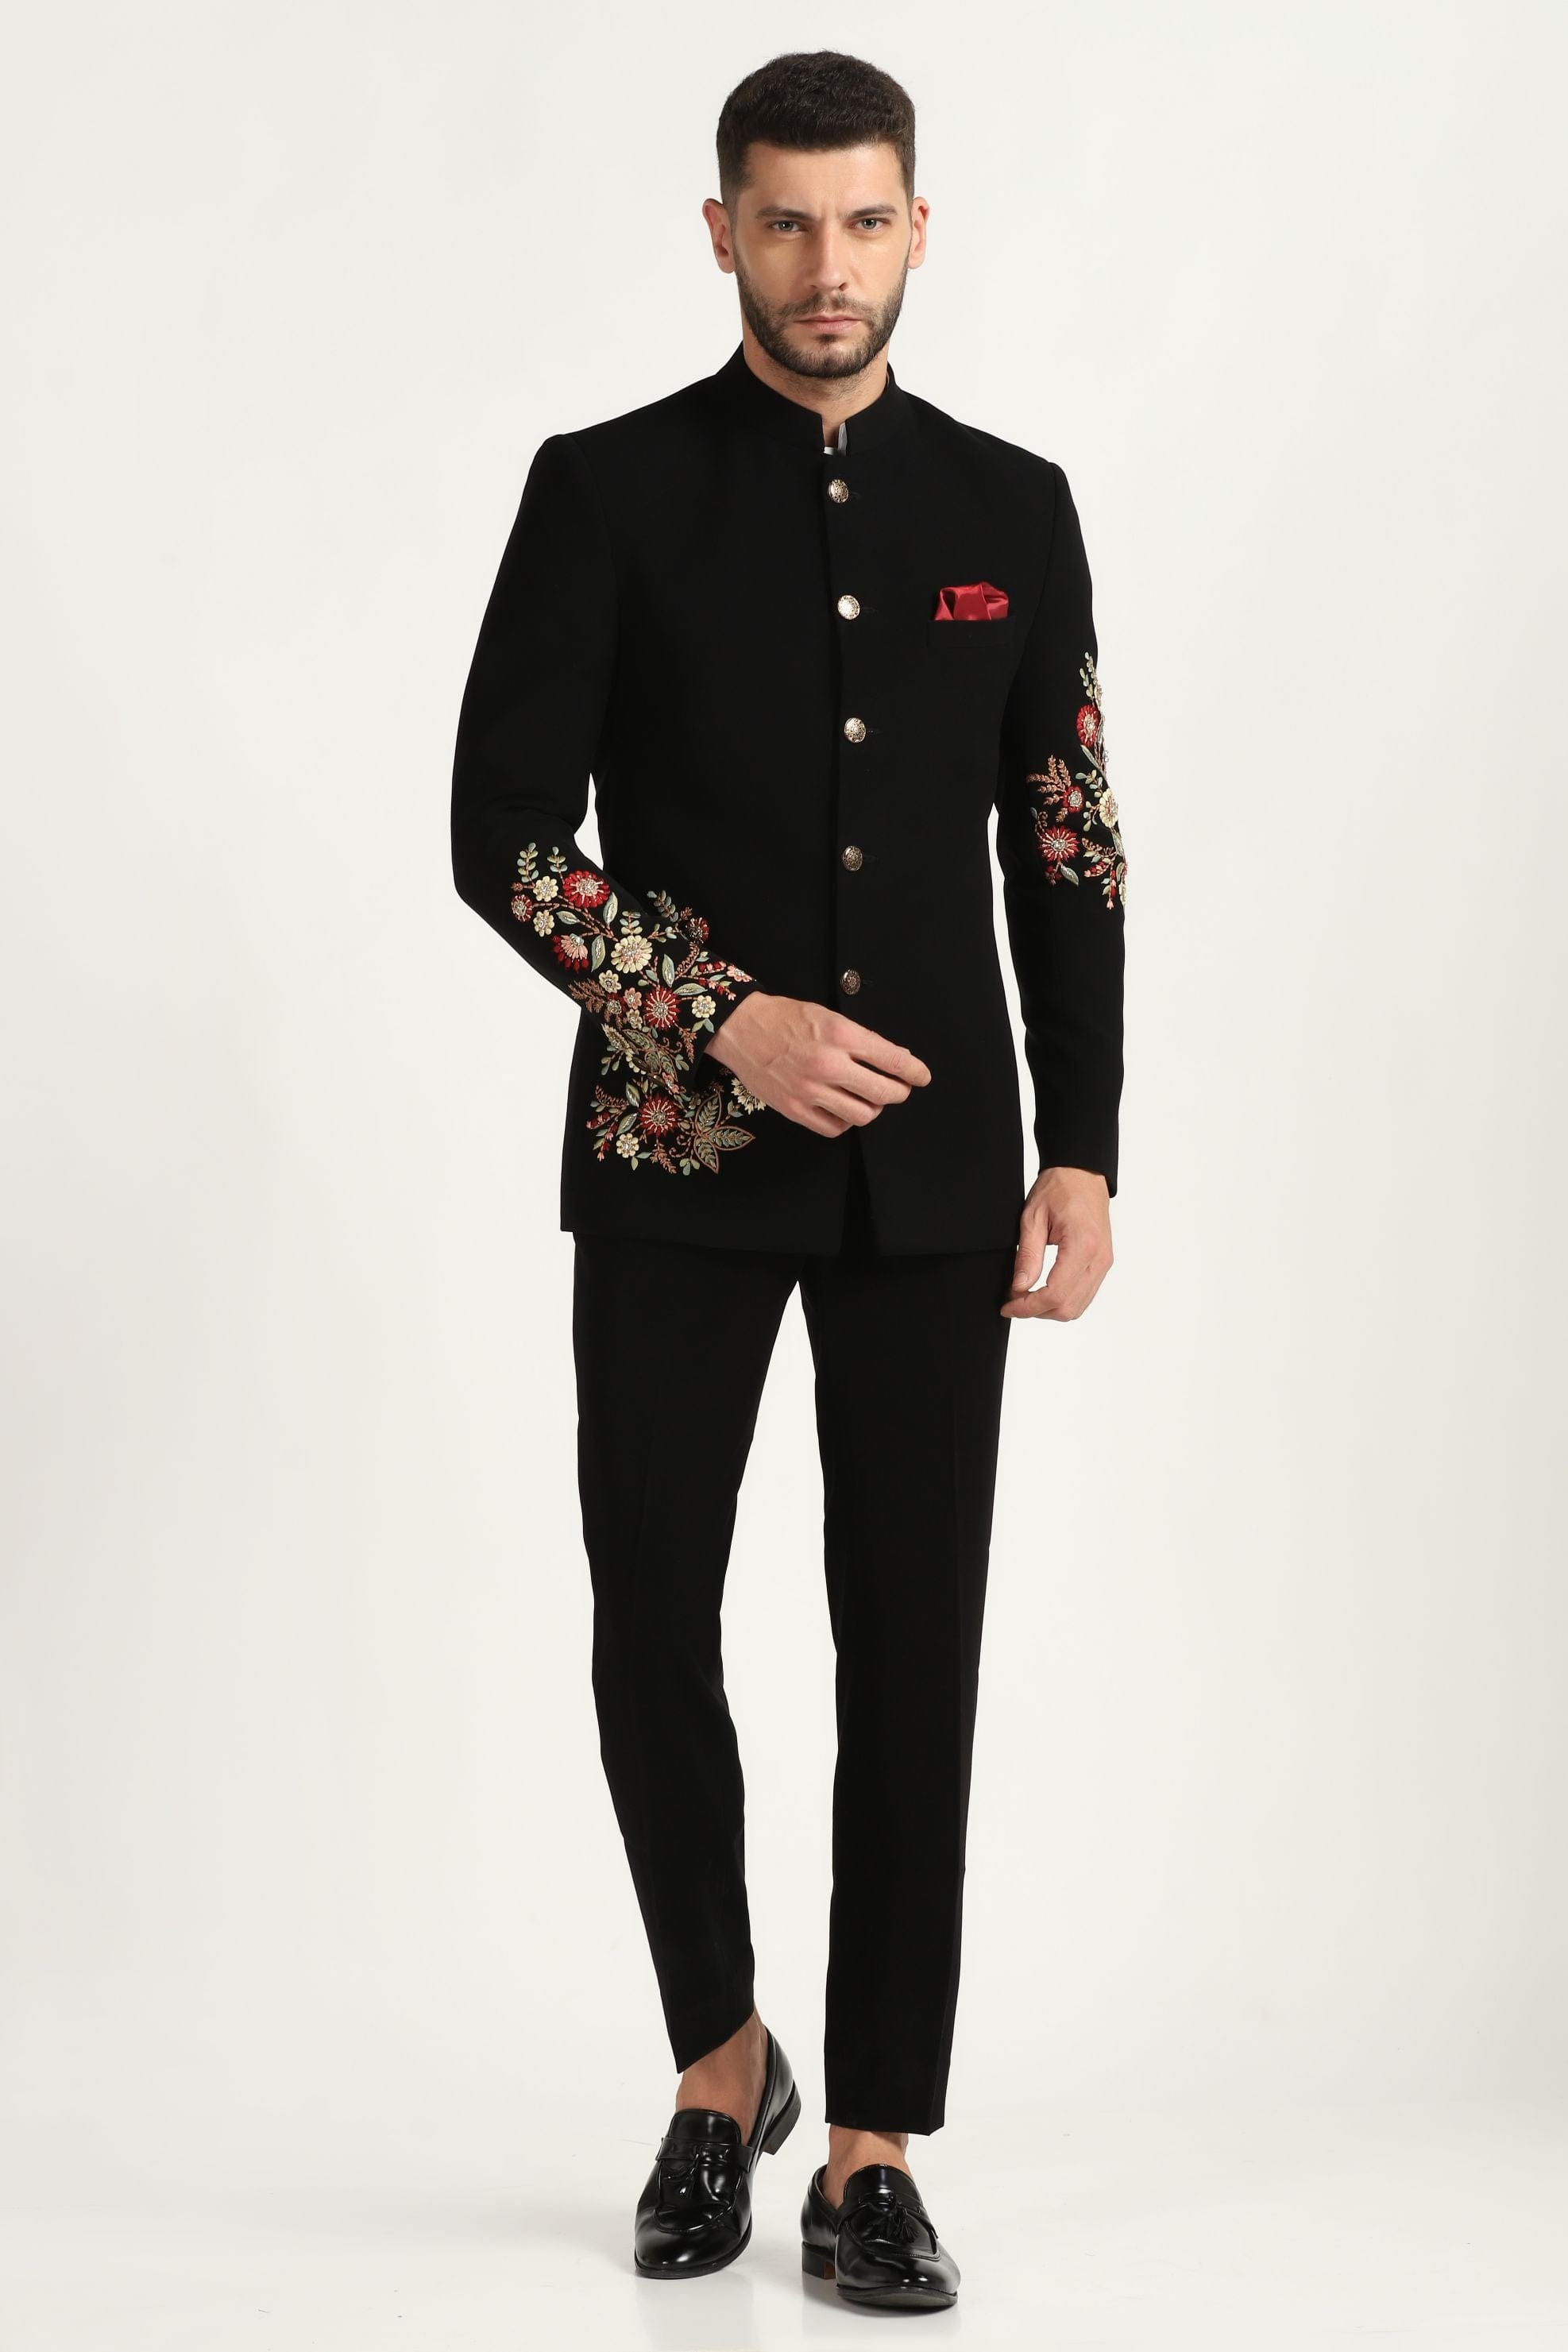 Black Bandhgala Jacket with Mustard Breeches – The Imperial India Company